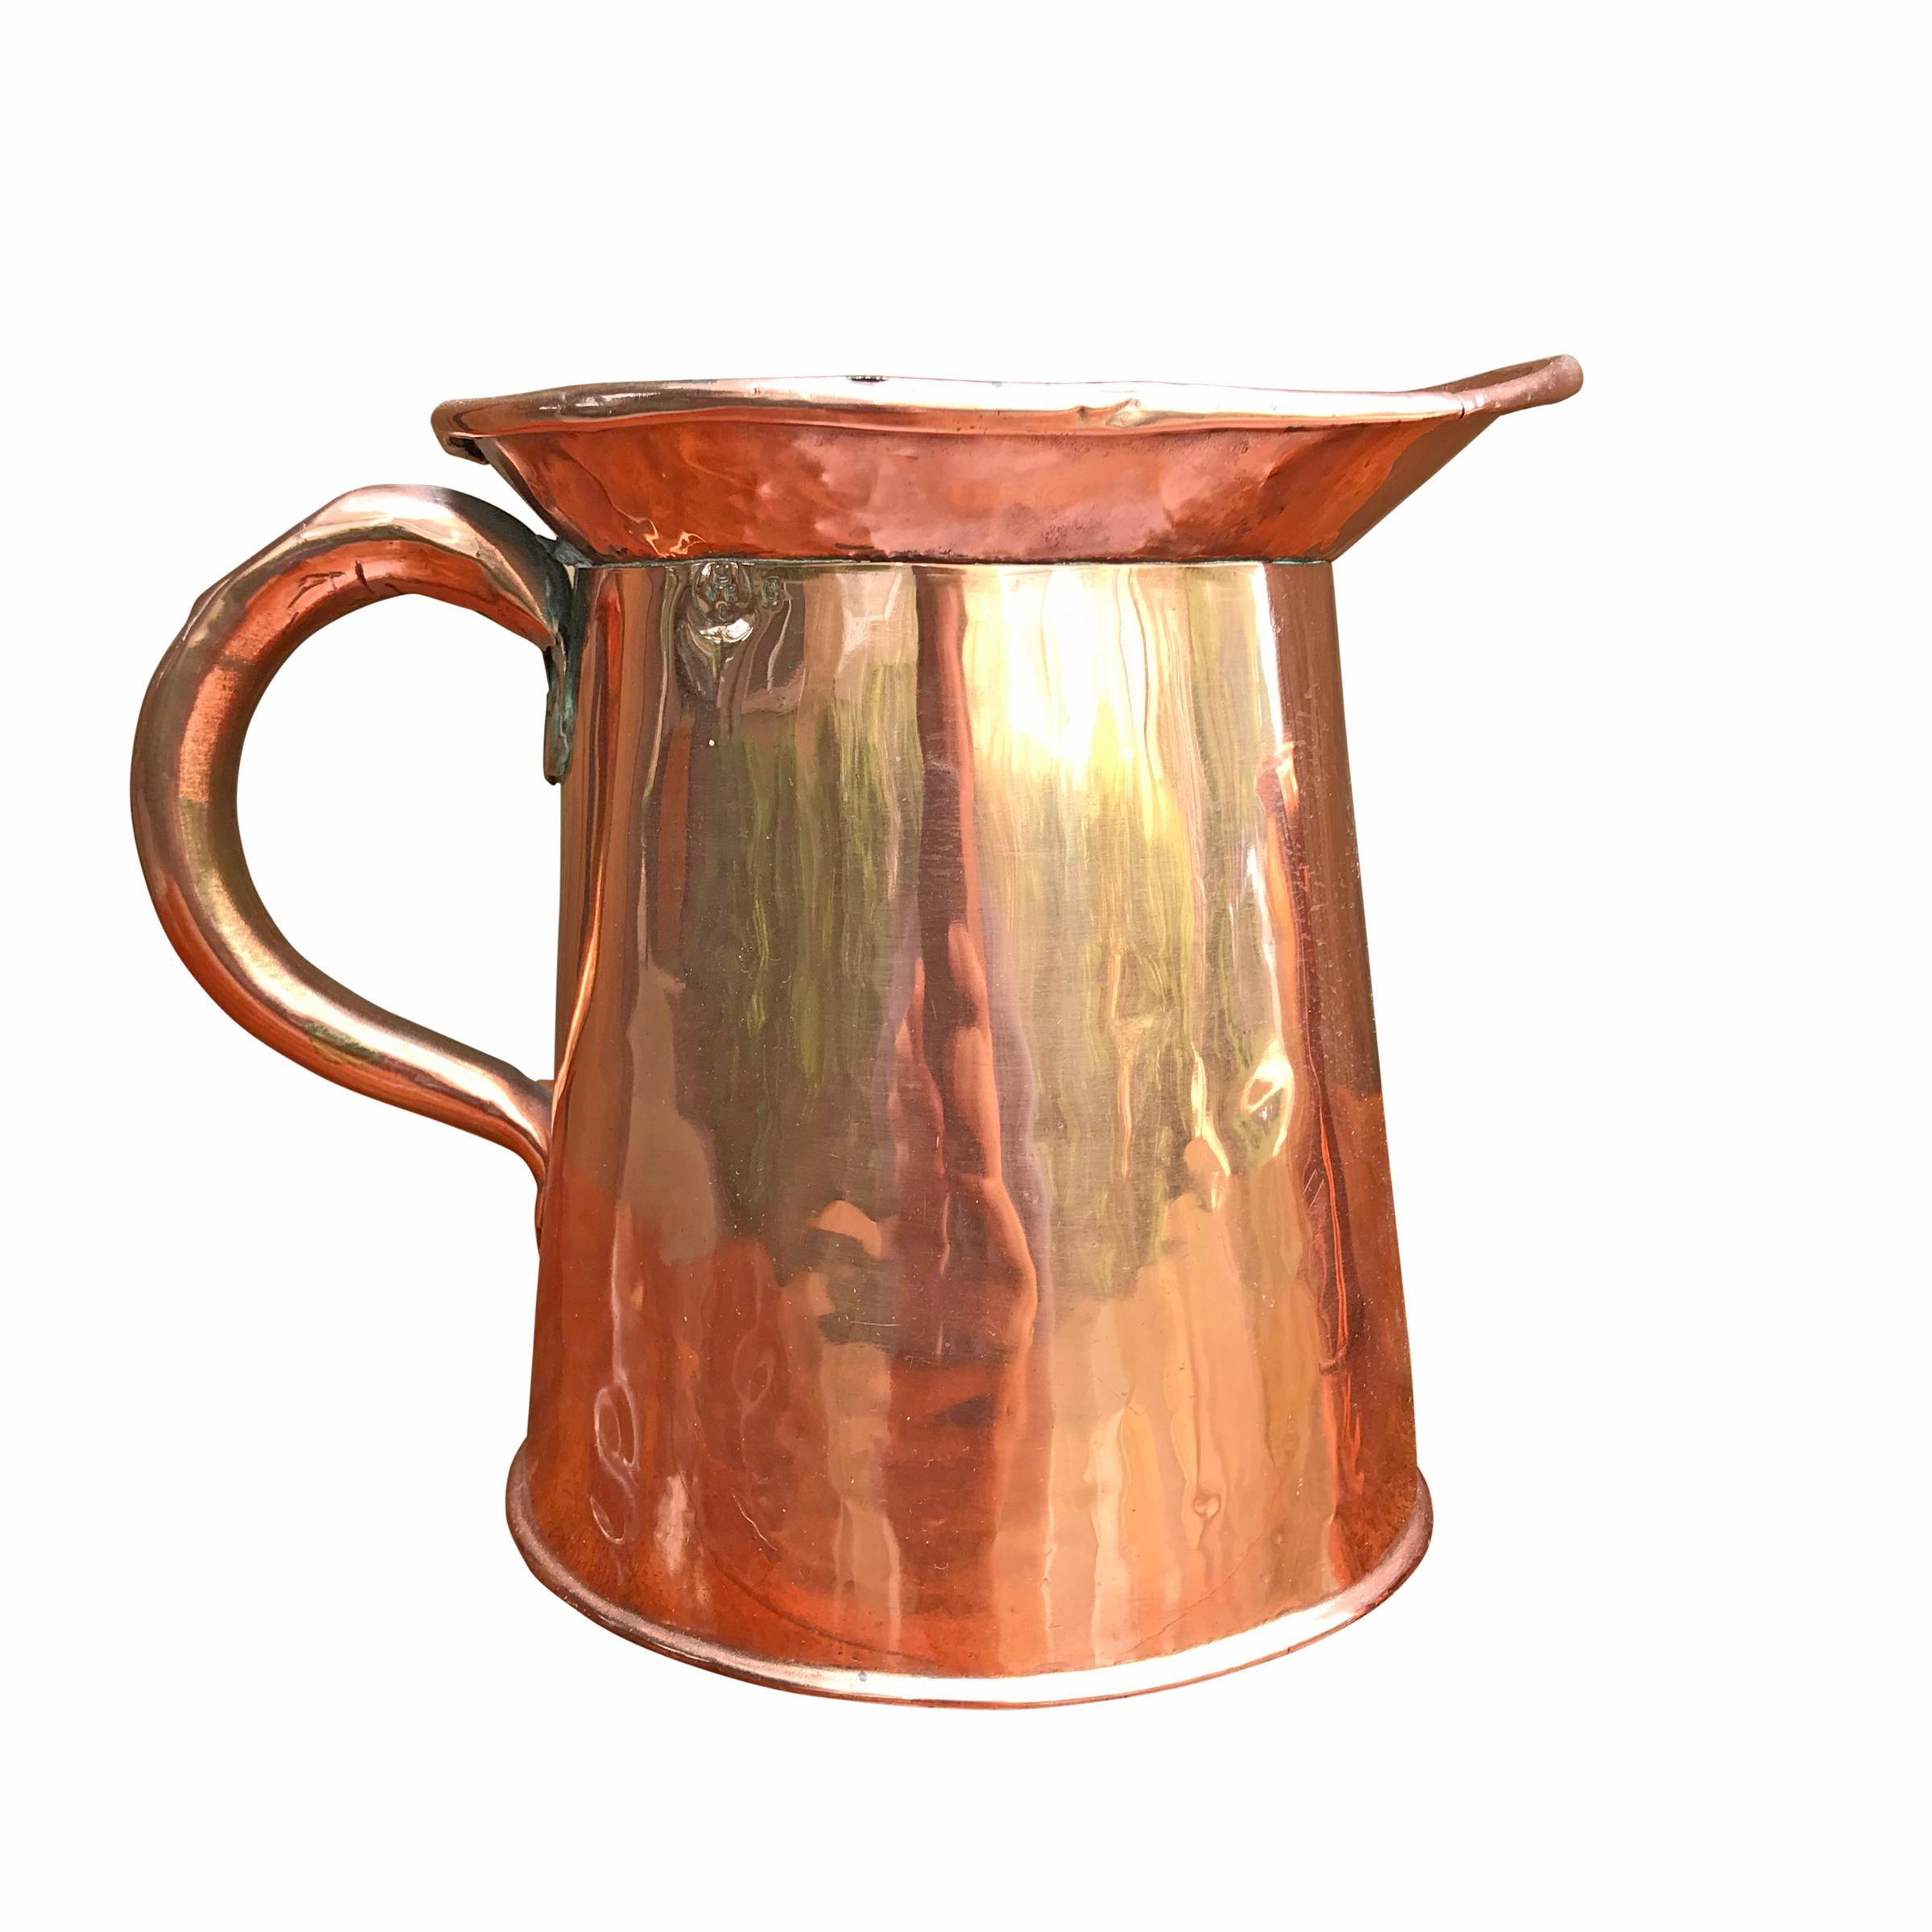 A set of four English Victorian period copper graduated pitchers, the largest being engraved 